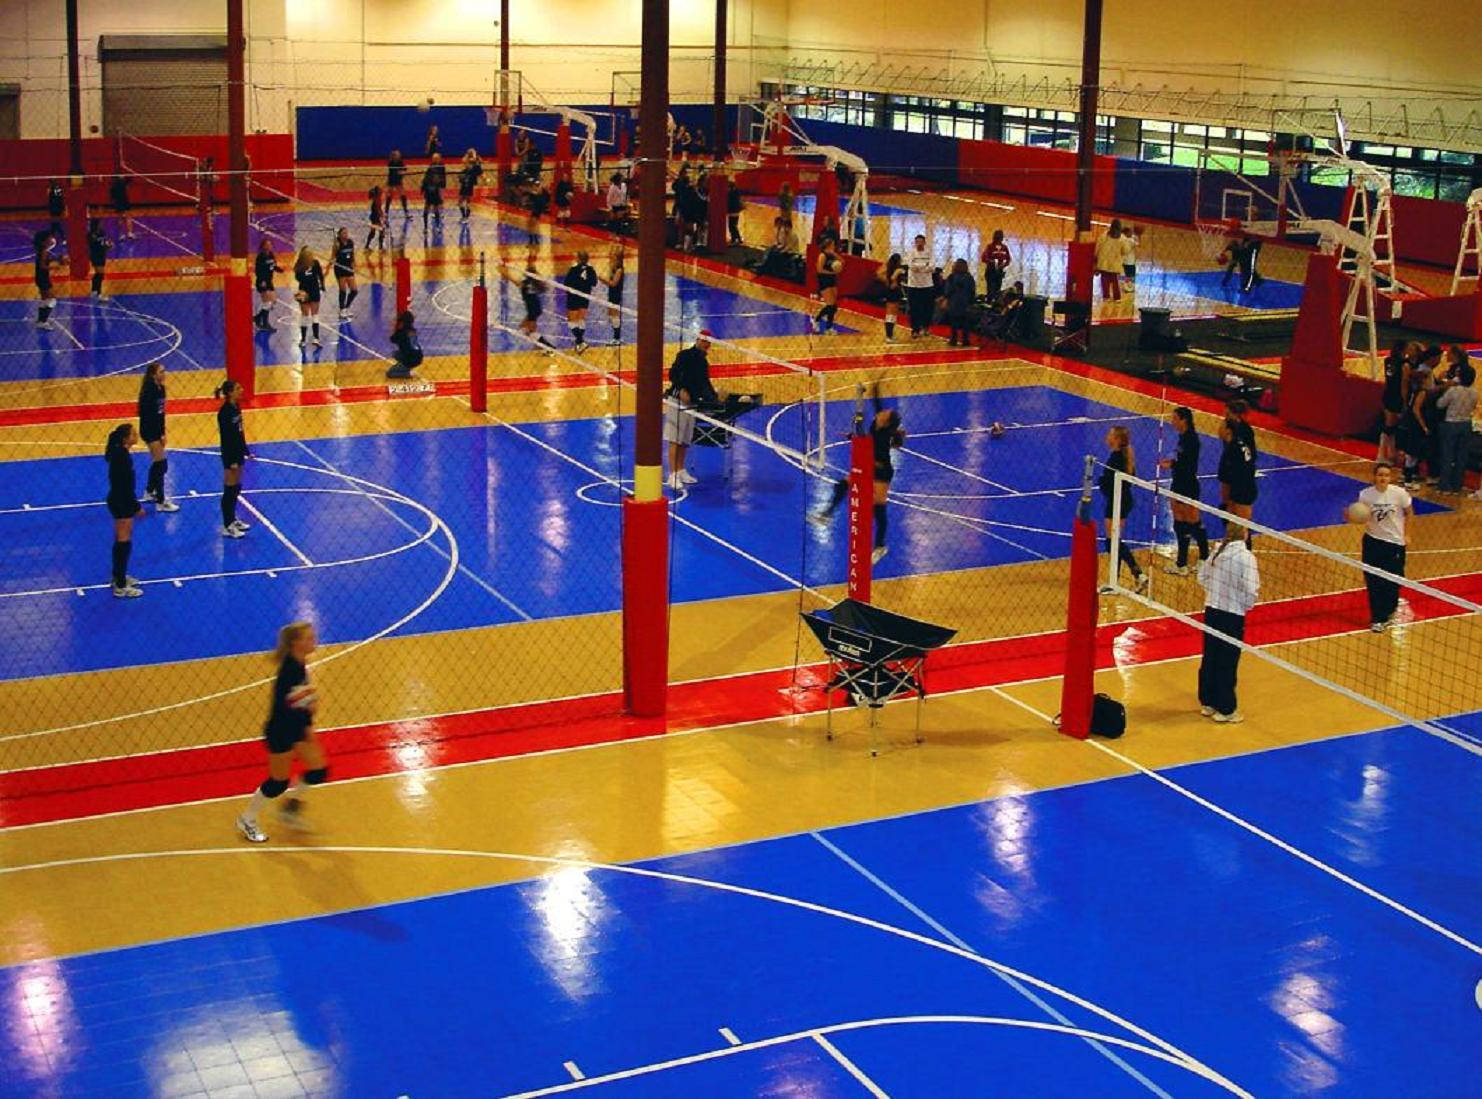 Get ready for game day and make your dibs on the court for an indoor volleyball match. Wallpaper